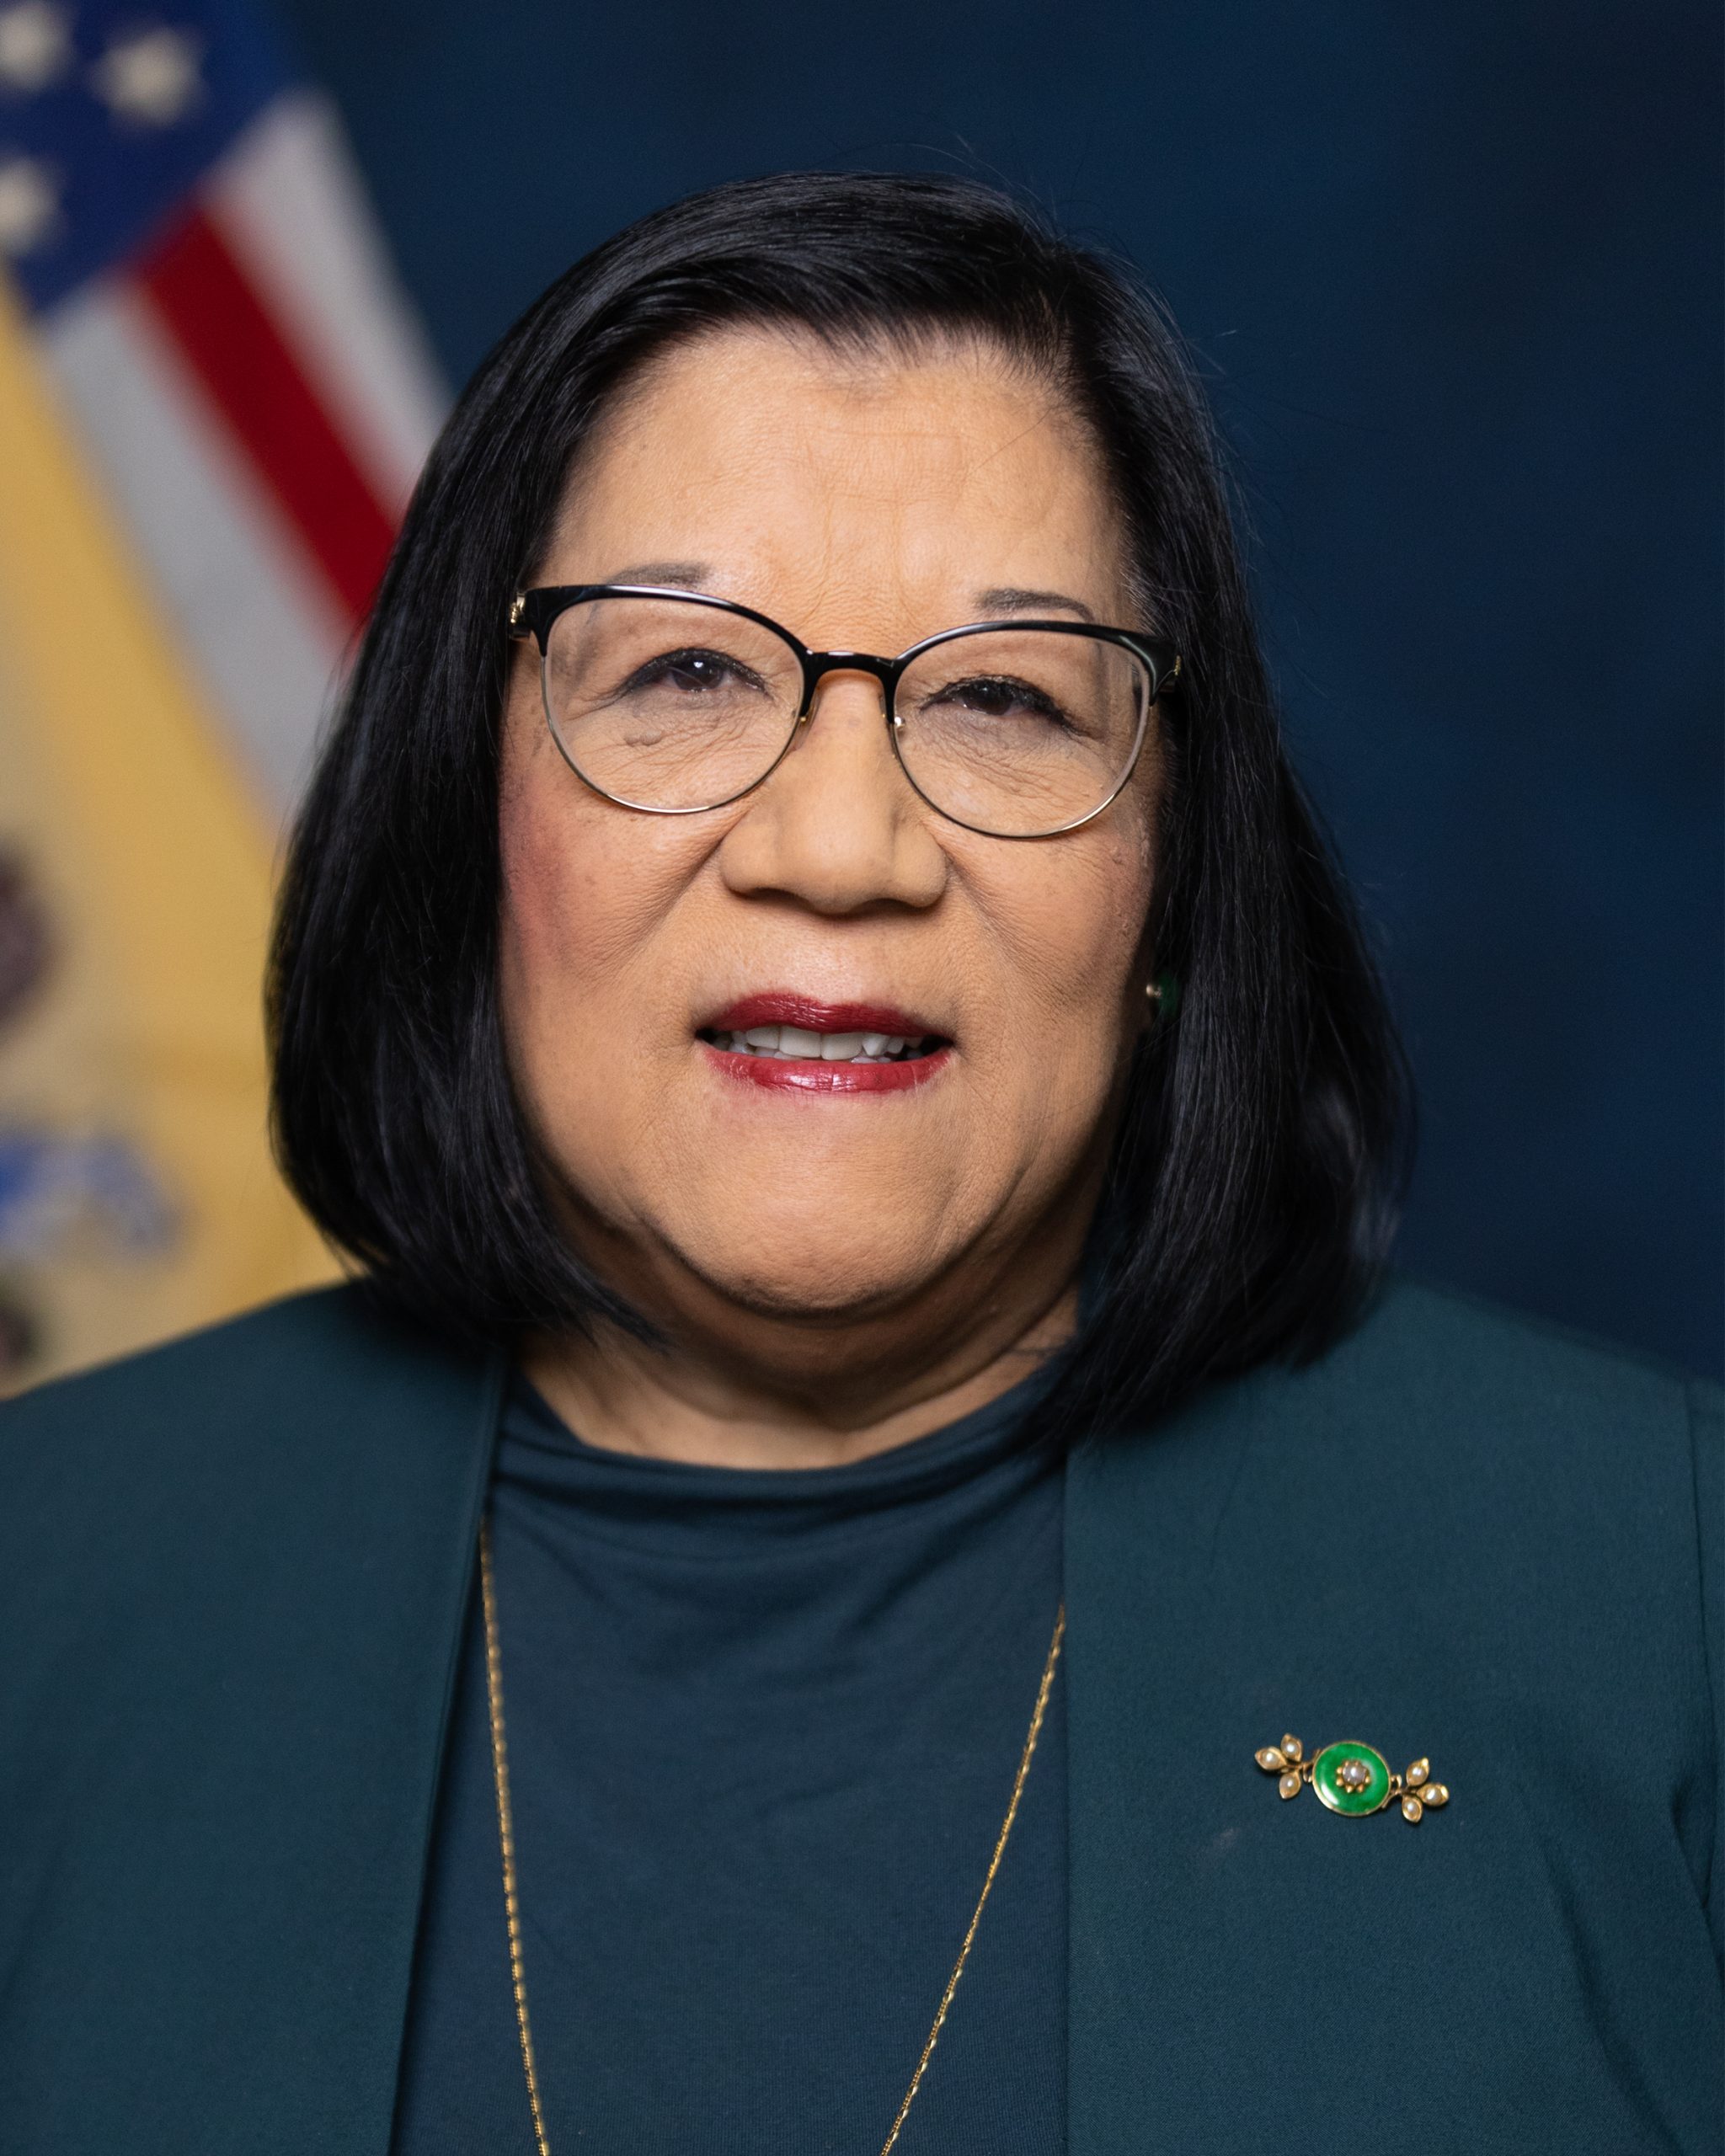  </p>
<h3 style="color:white;">Lora Fong</h3>
<h5 style="color:white;font-style:italic;">Chief Diversity, Equity, and Inclusion Officer</h5>
<p>